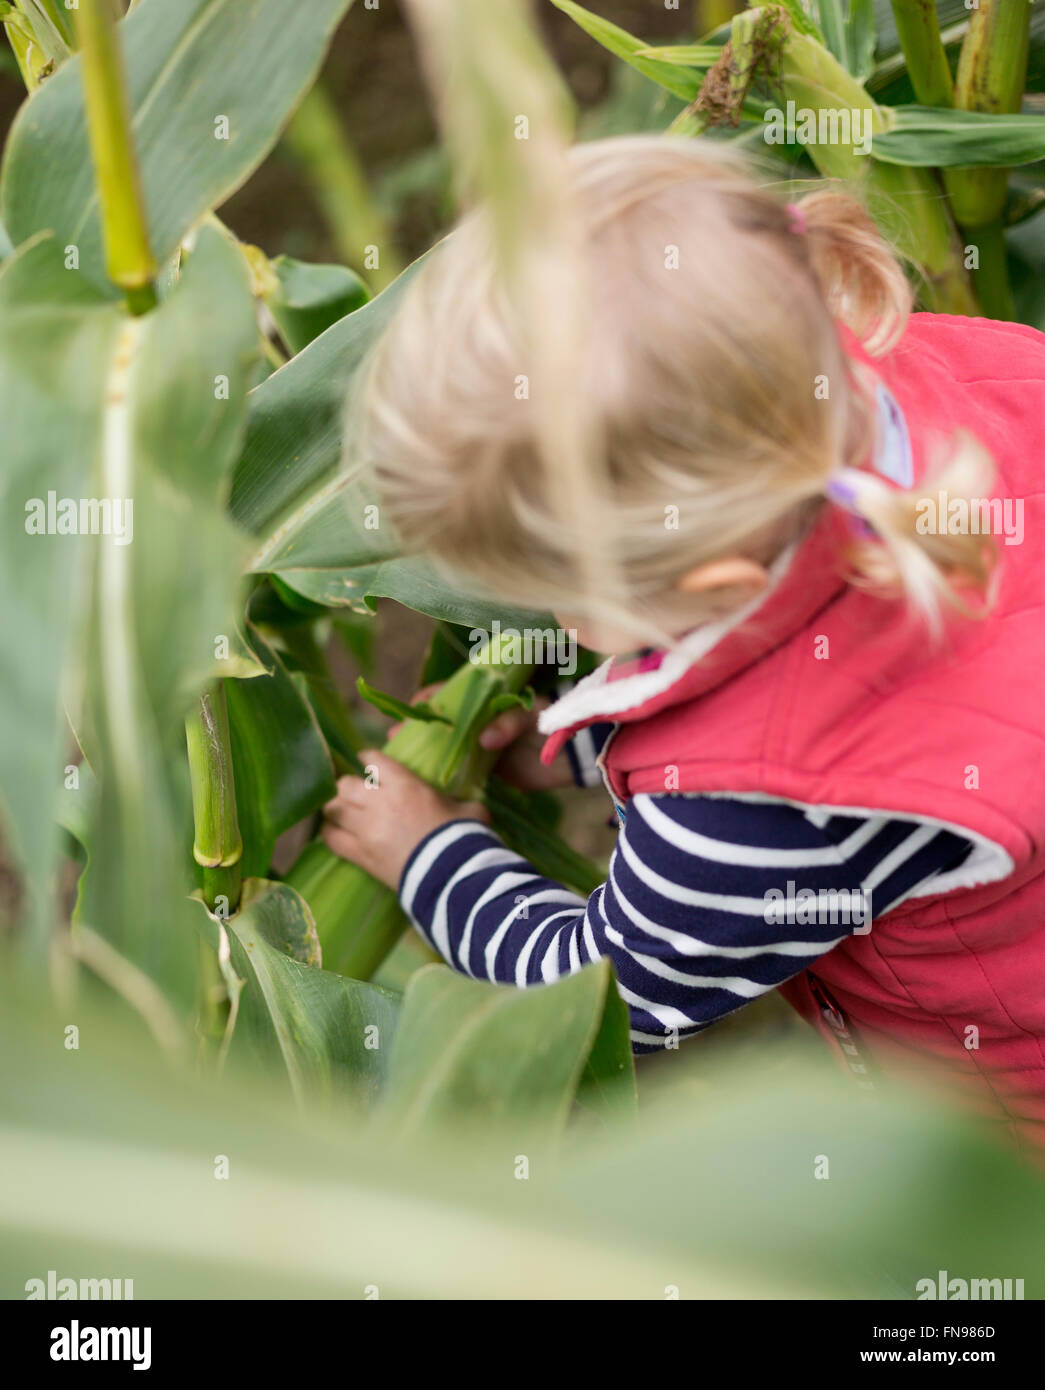 A young girl child reaching into corn stalks to pick the sweetcorn cobs. Stock Photo